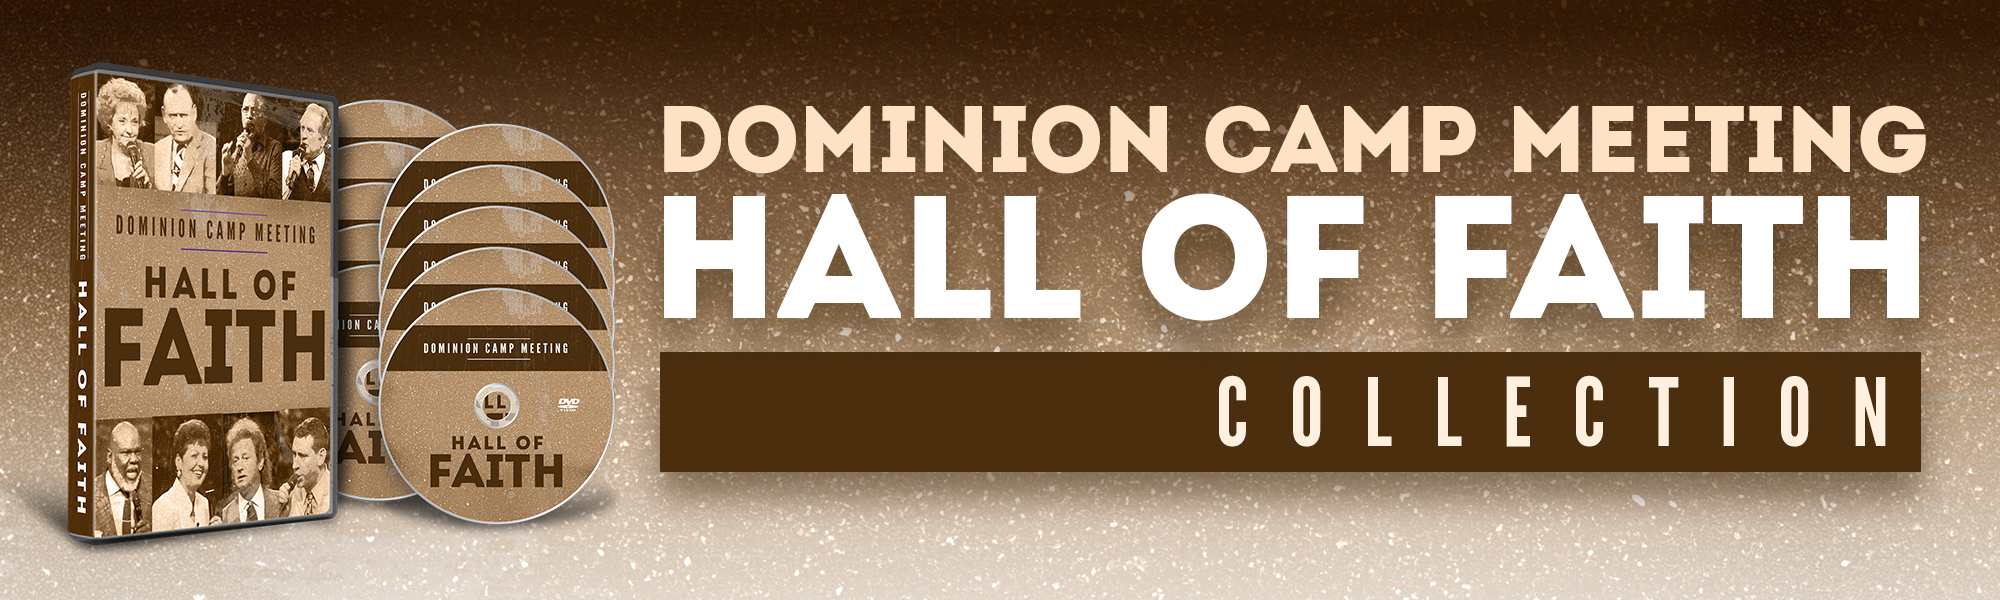 Dominion Camp Meeting Hall of Faith Collection